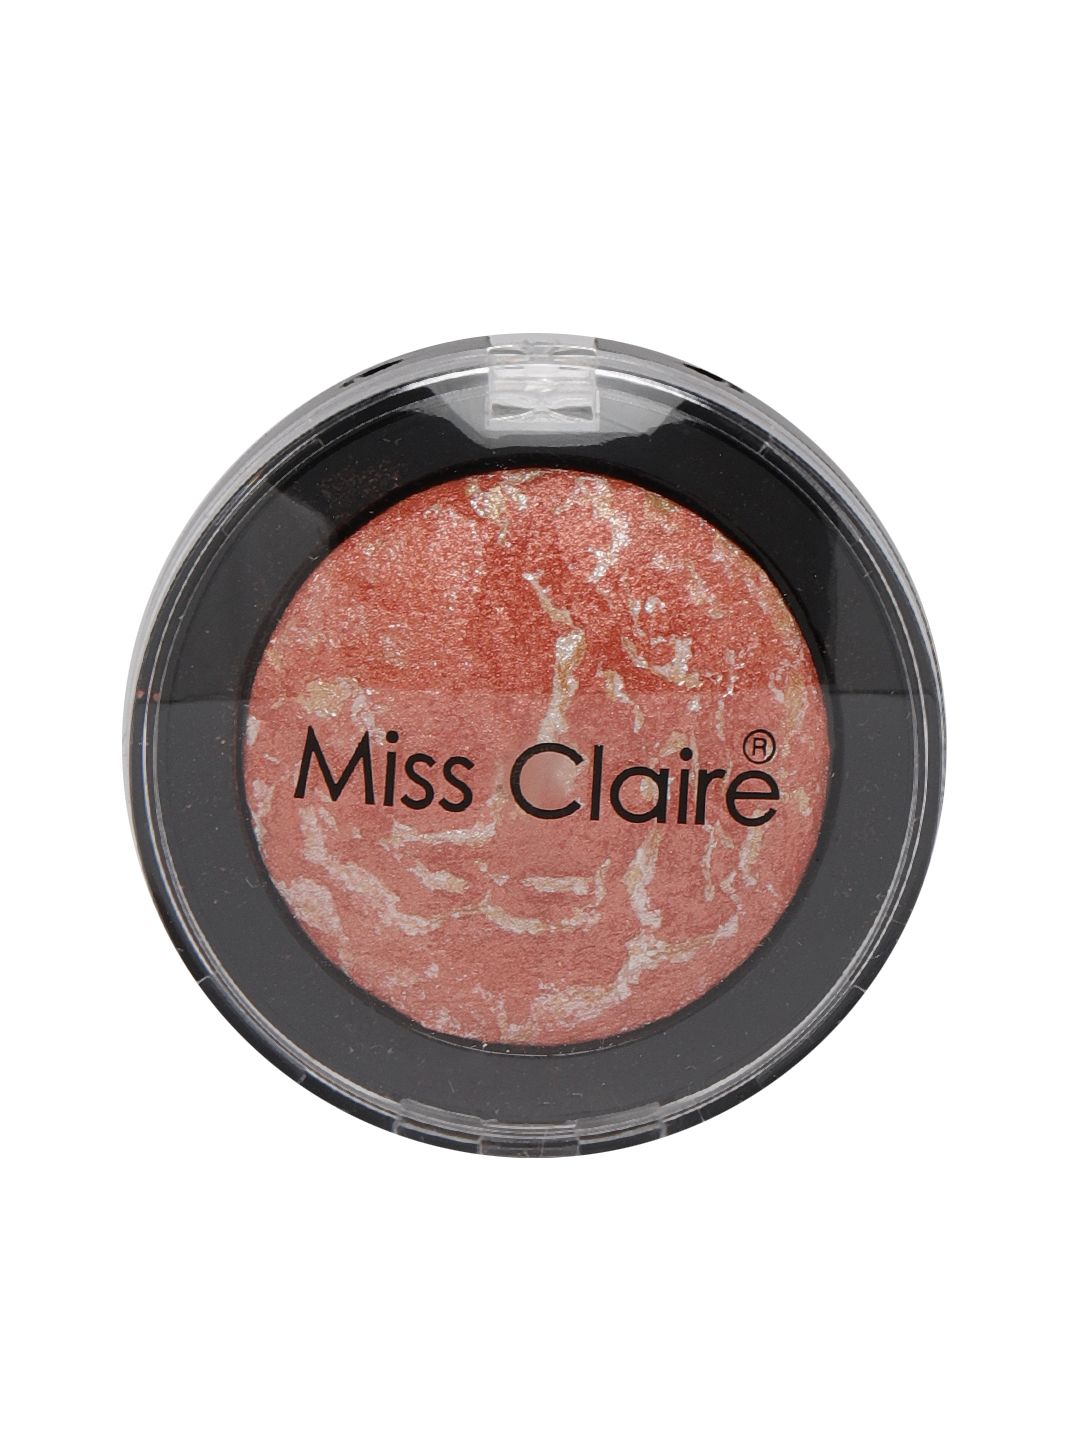 Miss Claire 02 Baked Duo Eyeshadow 3.5 g Price in India